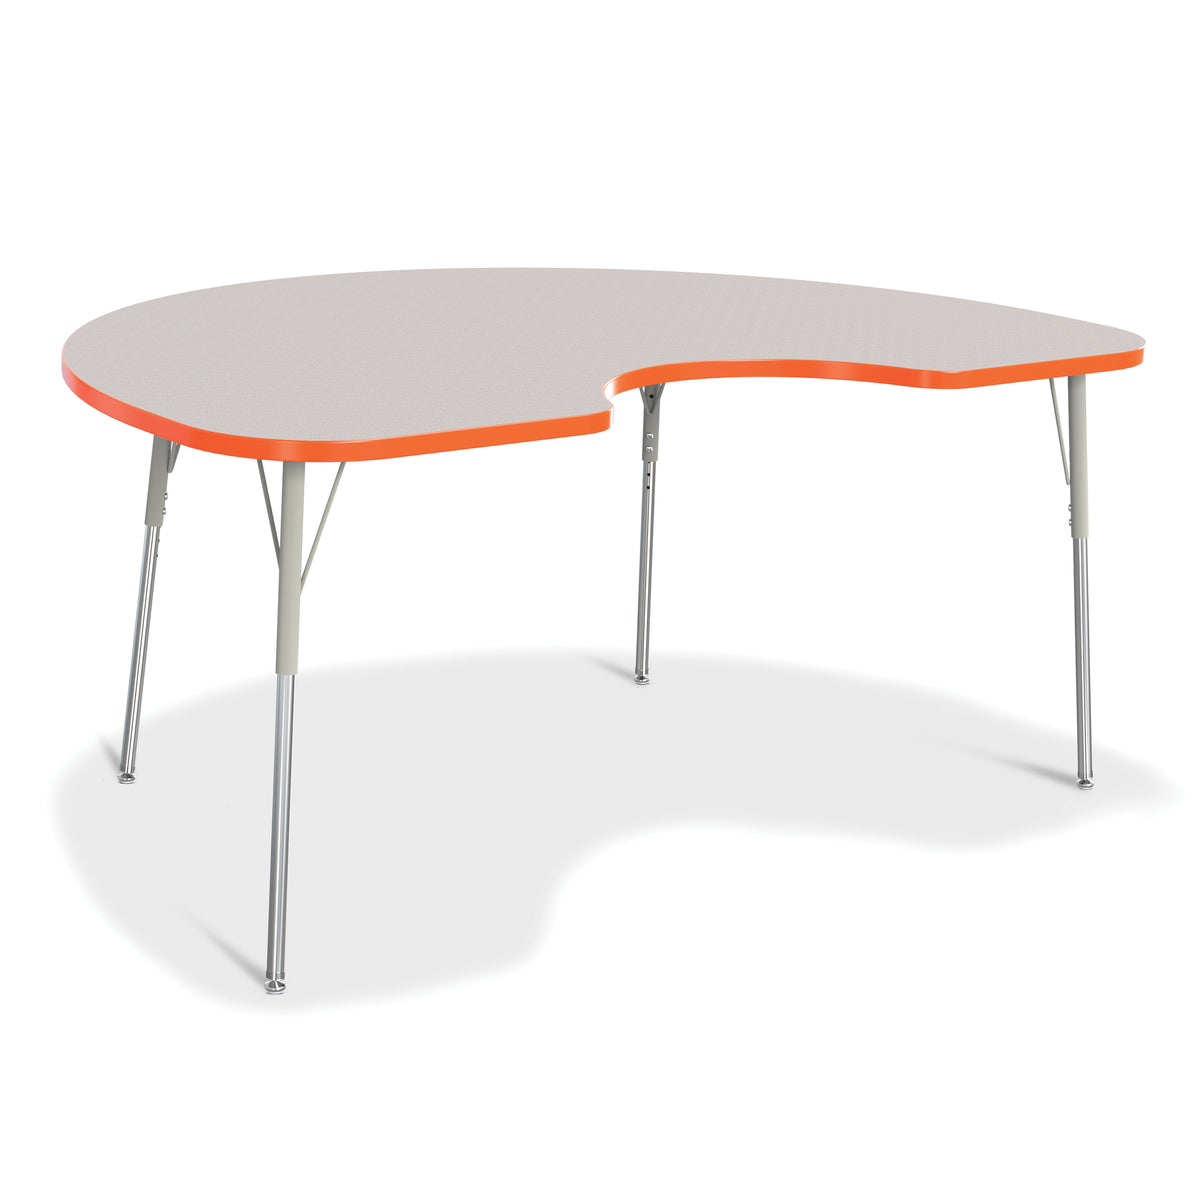 6423JCA114, Berries Kidney Activity Table - 48" X 72", A-height - Freckled Gray/Orange/Gray